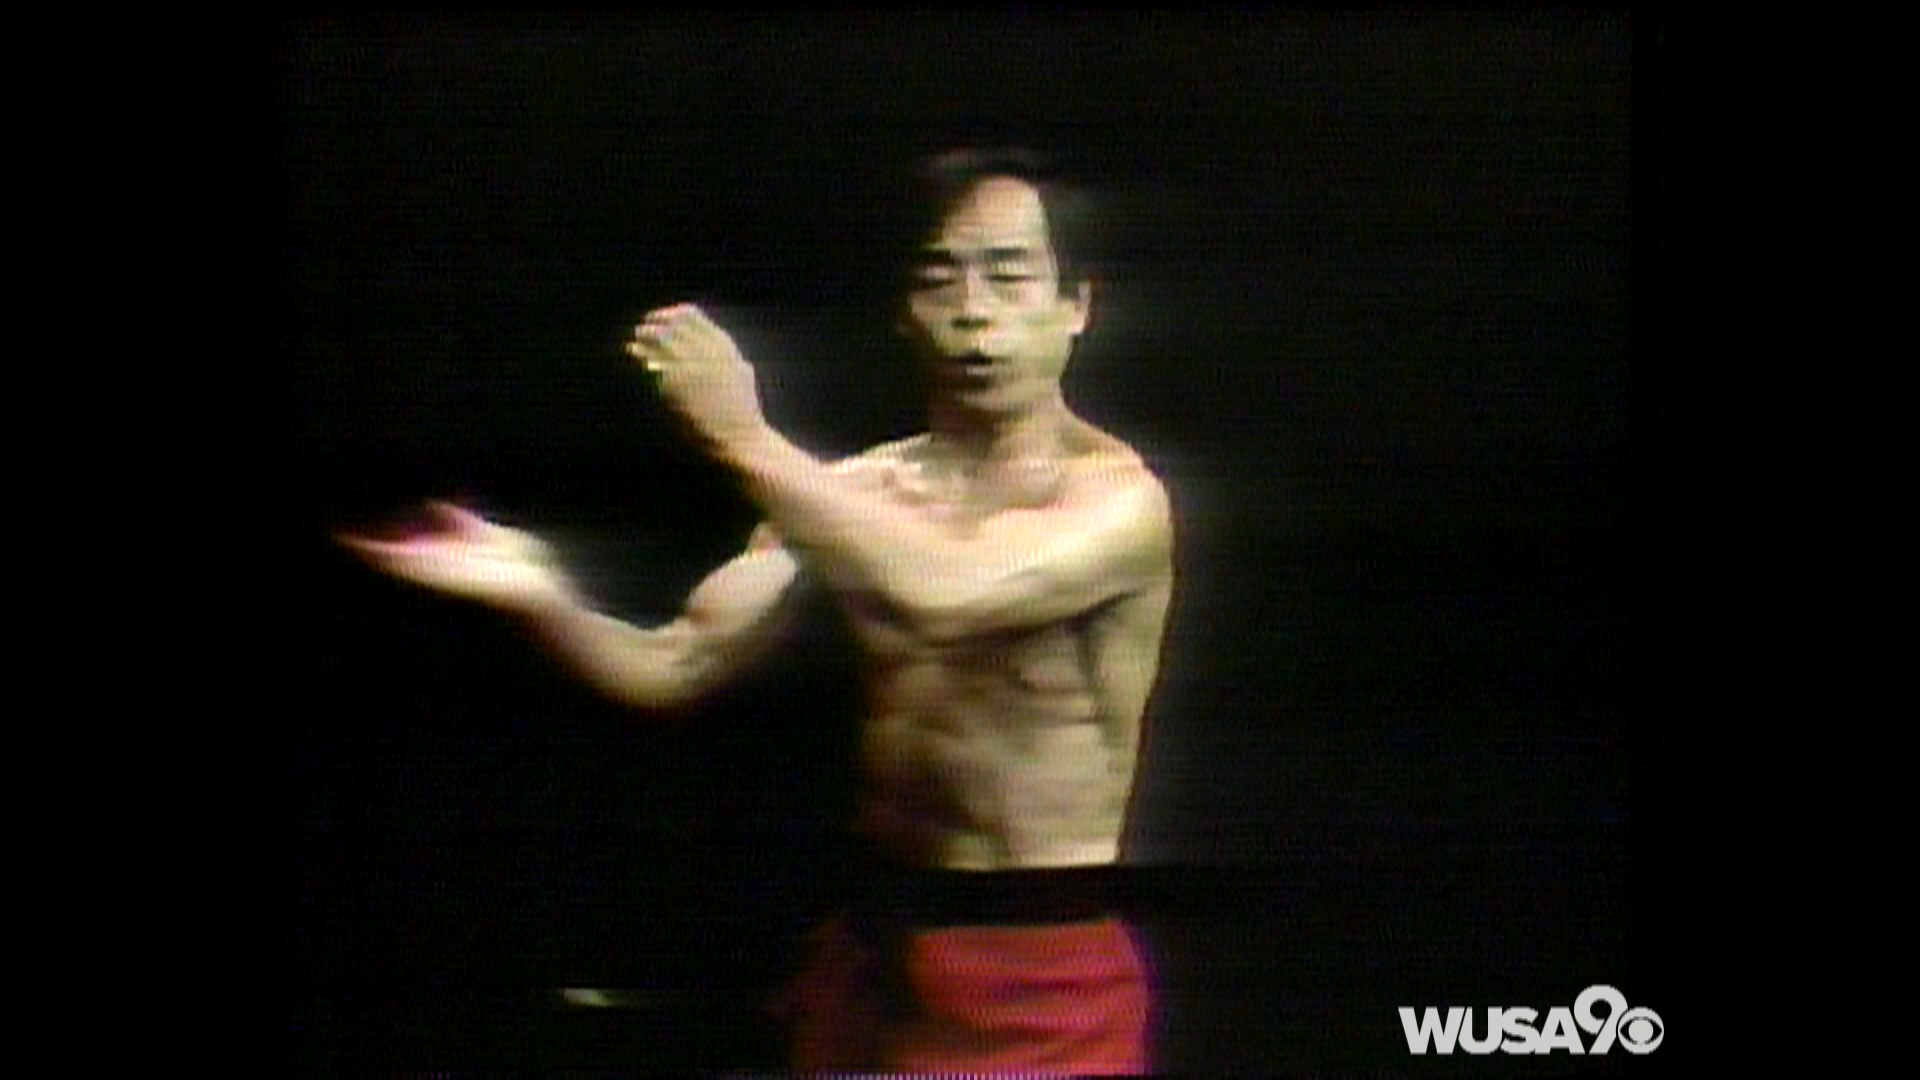 This is a file story from 1993 featuring Tae Kwon Do Grandmaster Jhoon Rhee and his children talking about the famous 'Nobody bothers me' commercials.